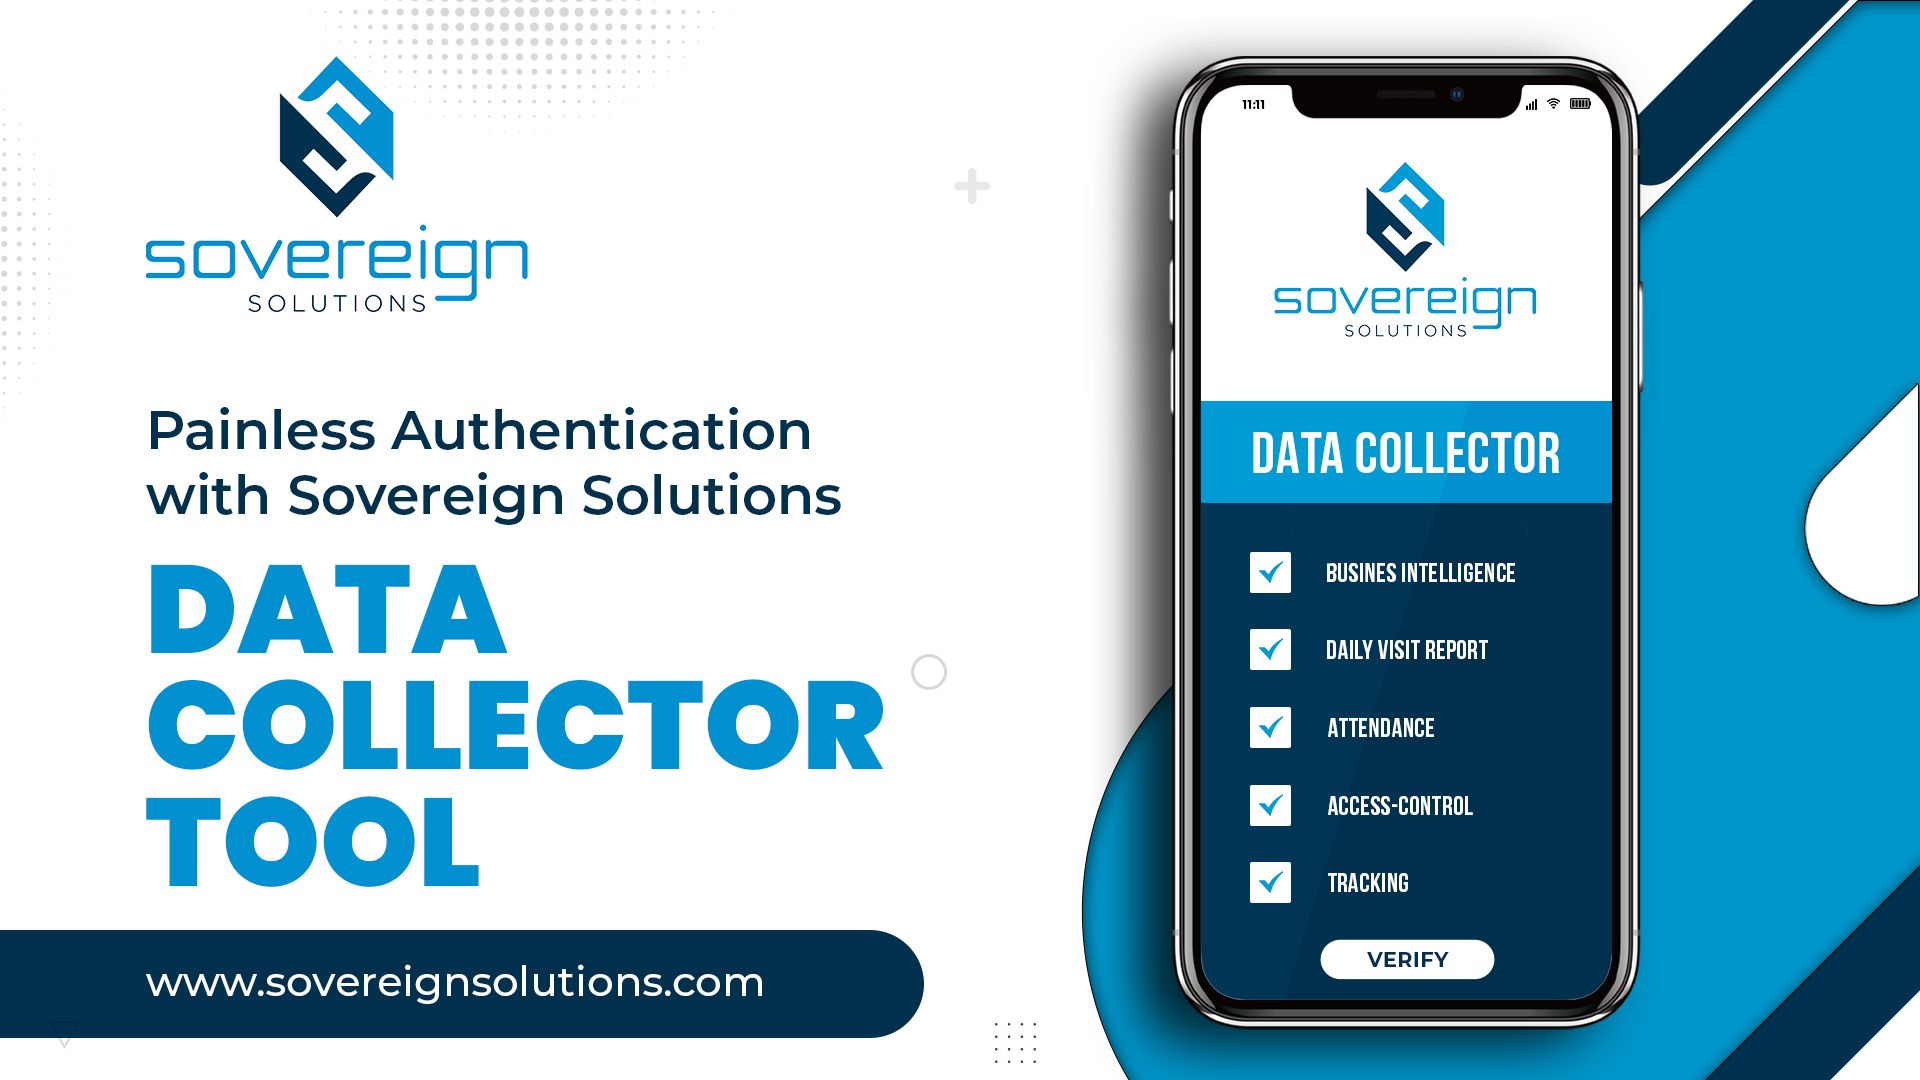 Data Collector Tool